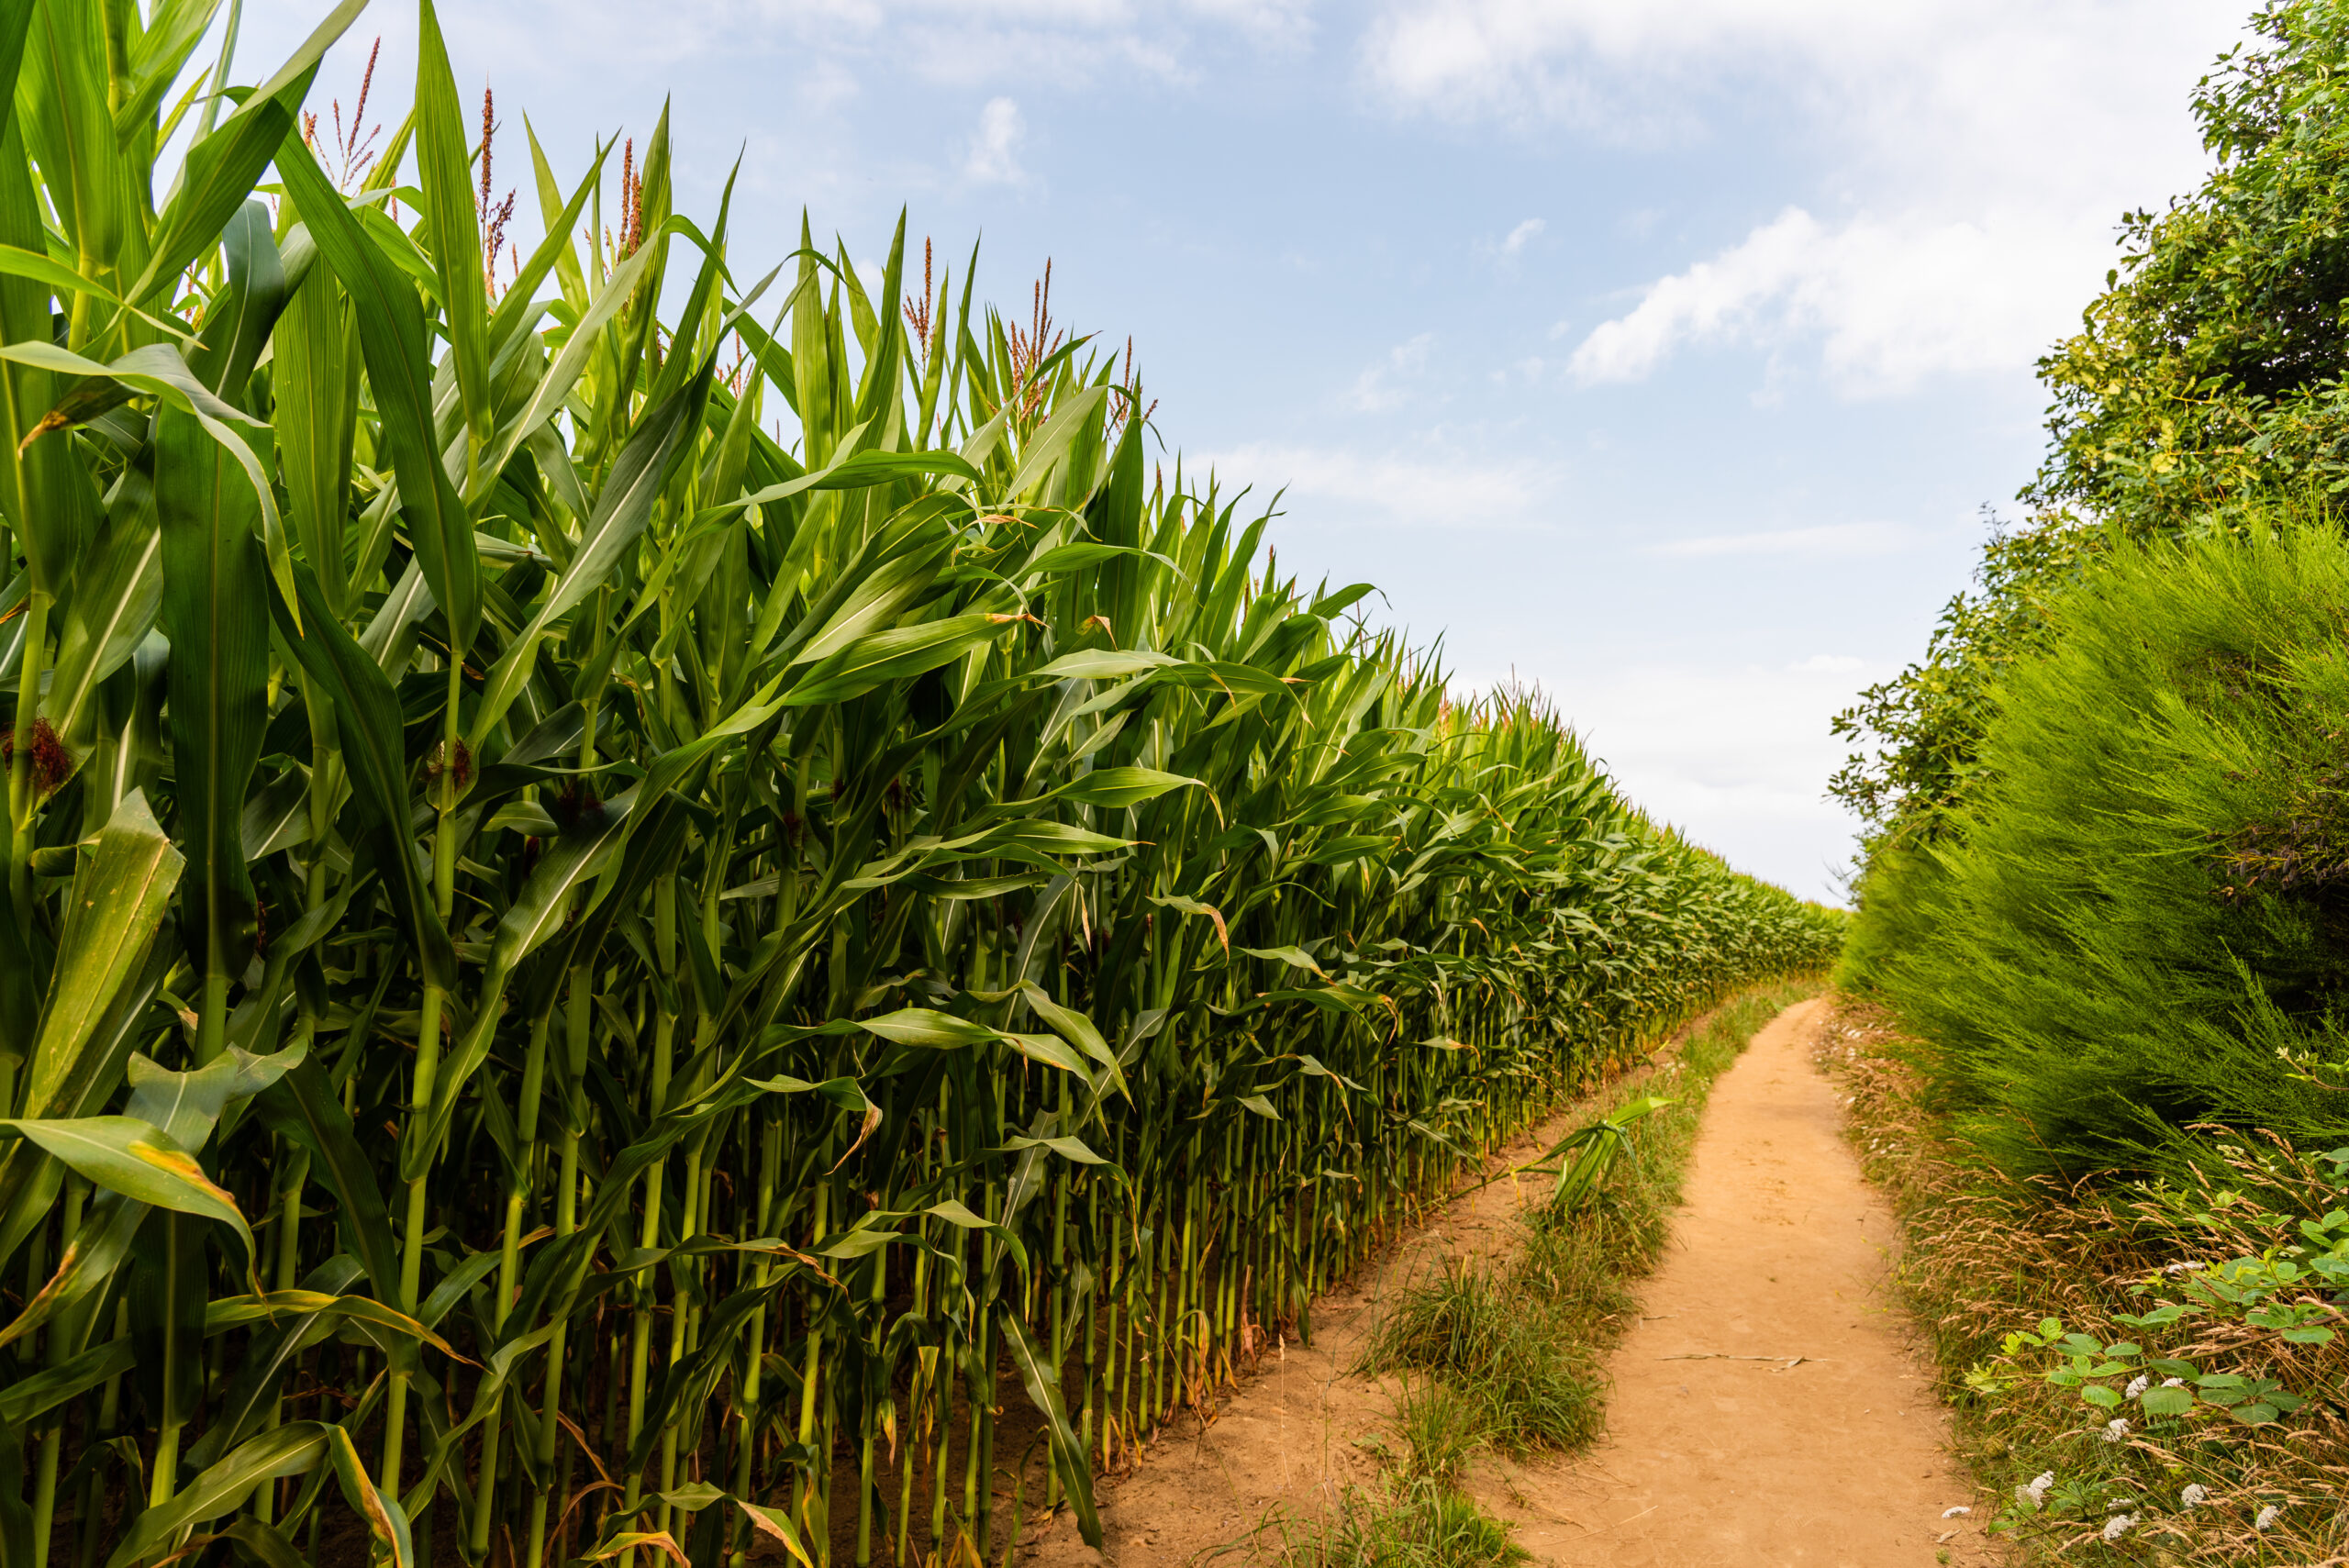 A path in the cornfield in the countryside